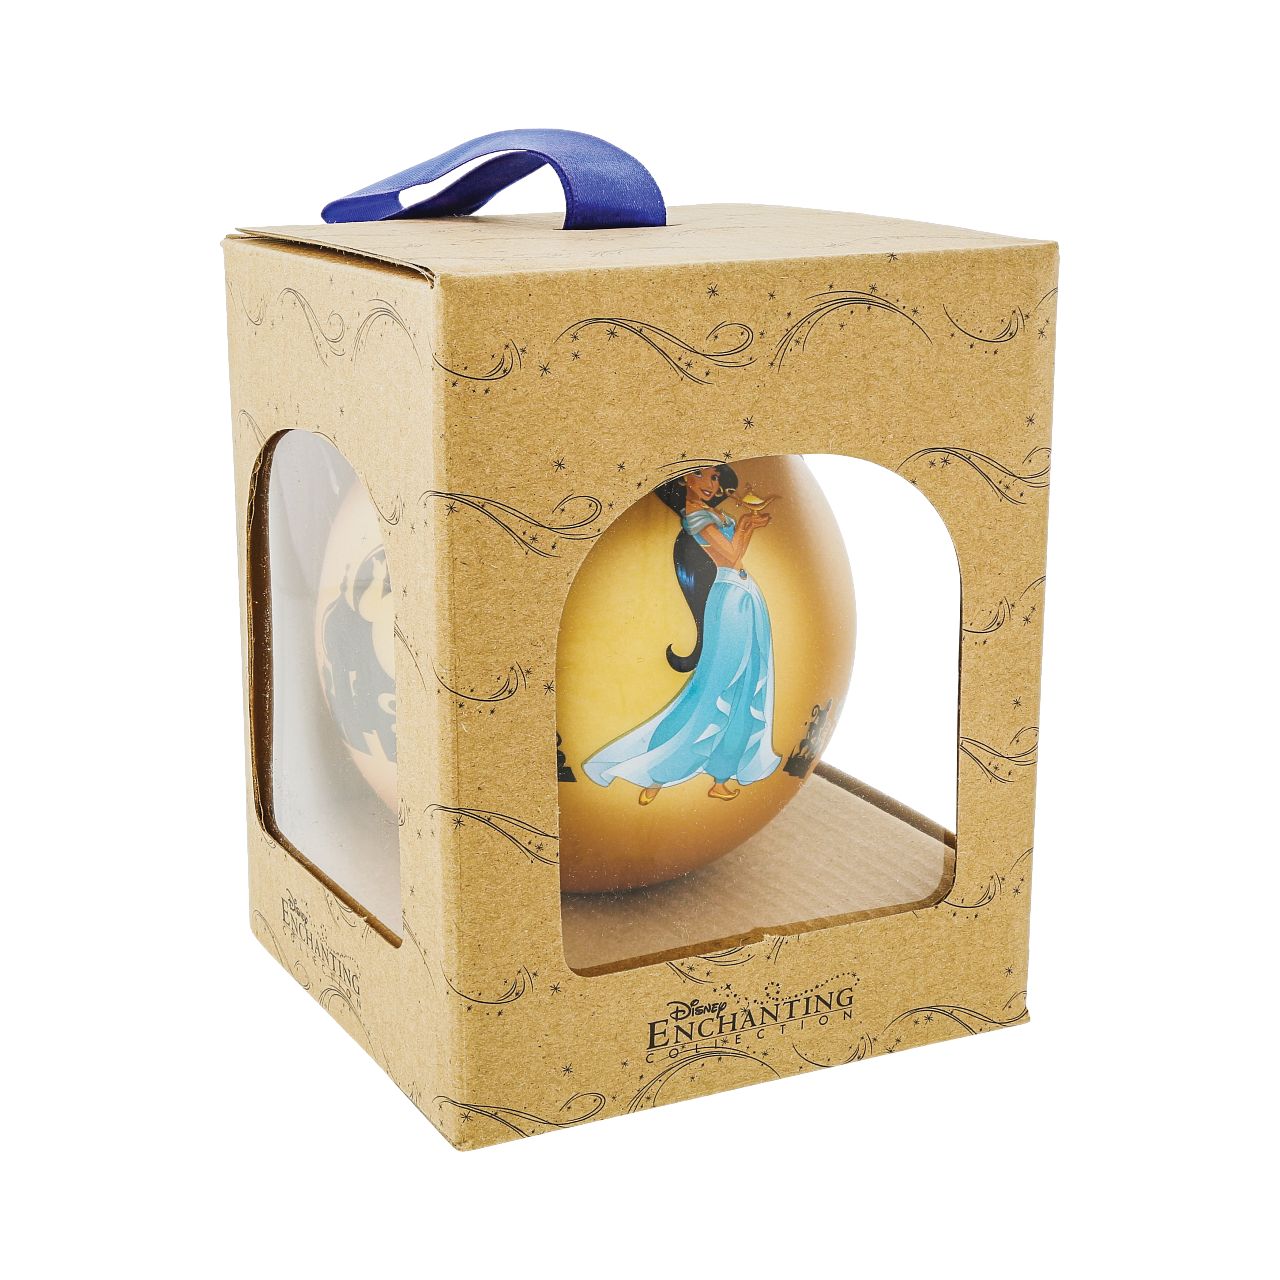 Disney Christmas Bauble Aladdin It's All So Magical  Jasmine from Disney's Aladdin can be found alongside Genie, Abu and the magic carpet in this beautiful glass bauble. This treasured keepsake would make a lovely unique gift for a friend, or a self-purchase to brighten up the home. Pre